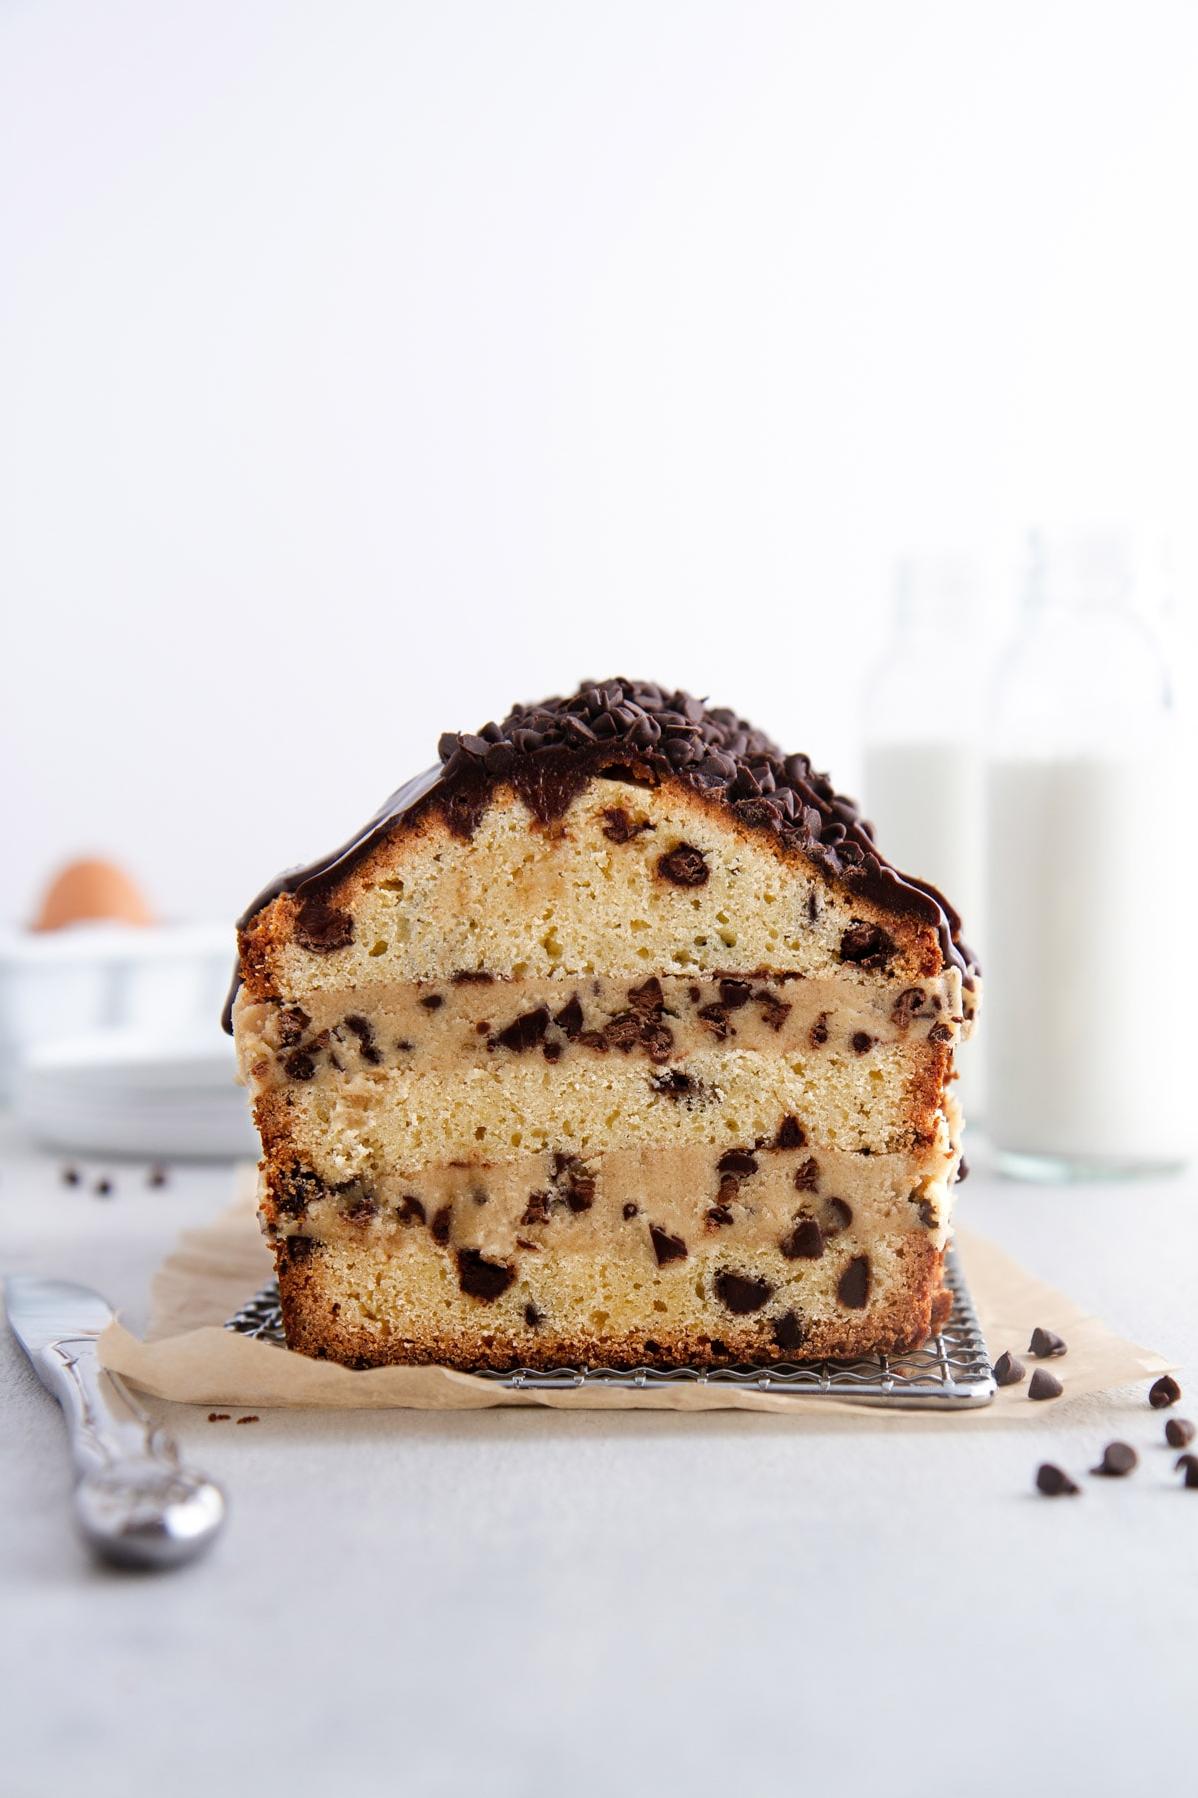  Indulge in a choco-licious treat with our Chocolate Cookie Pound Cake recipe!